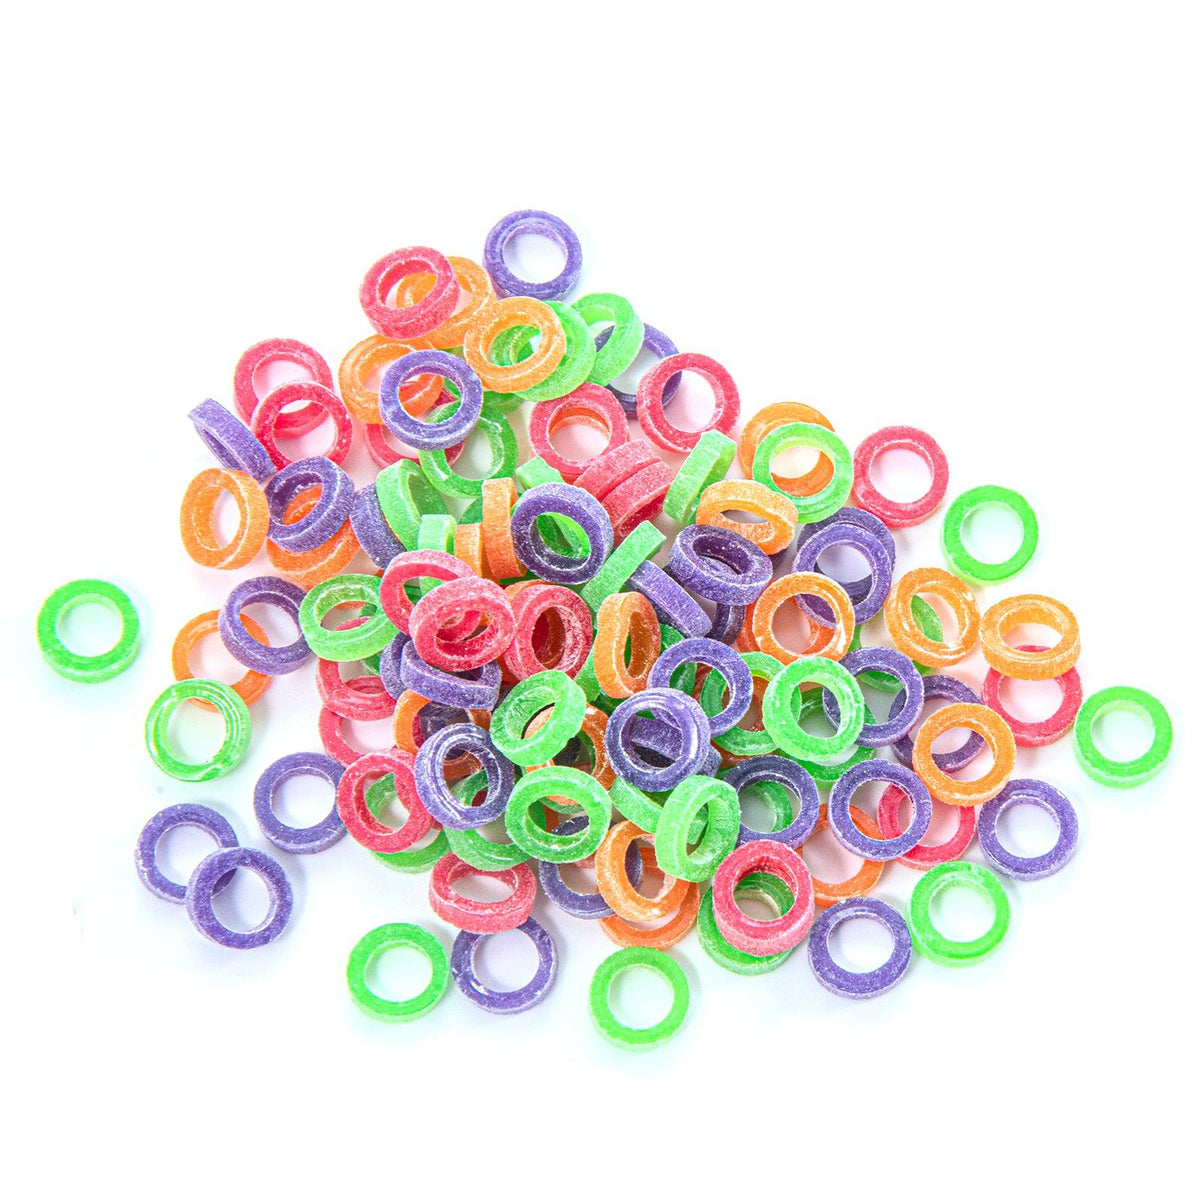 1/4 Inch Orthodontic Elastic Rubber Bands - 100 Bands - Neon Latex Heavy  4.5 Ounce Small Rubberbands Braces Dreadlocks Hair Braids Tooth Gap  Packaging Crafts - Sonic Dental - Made in USA